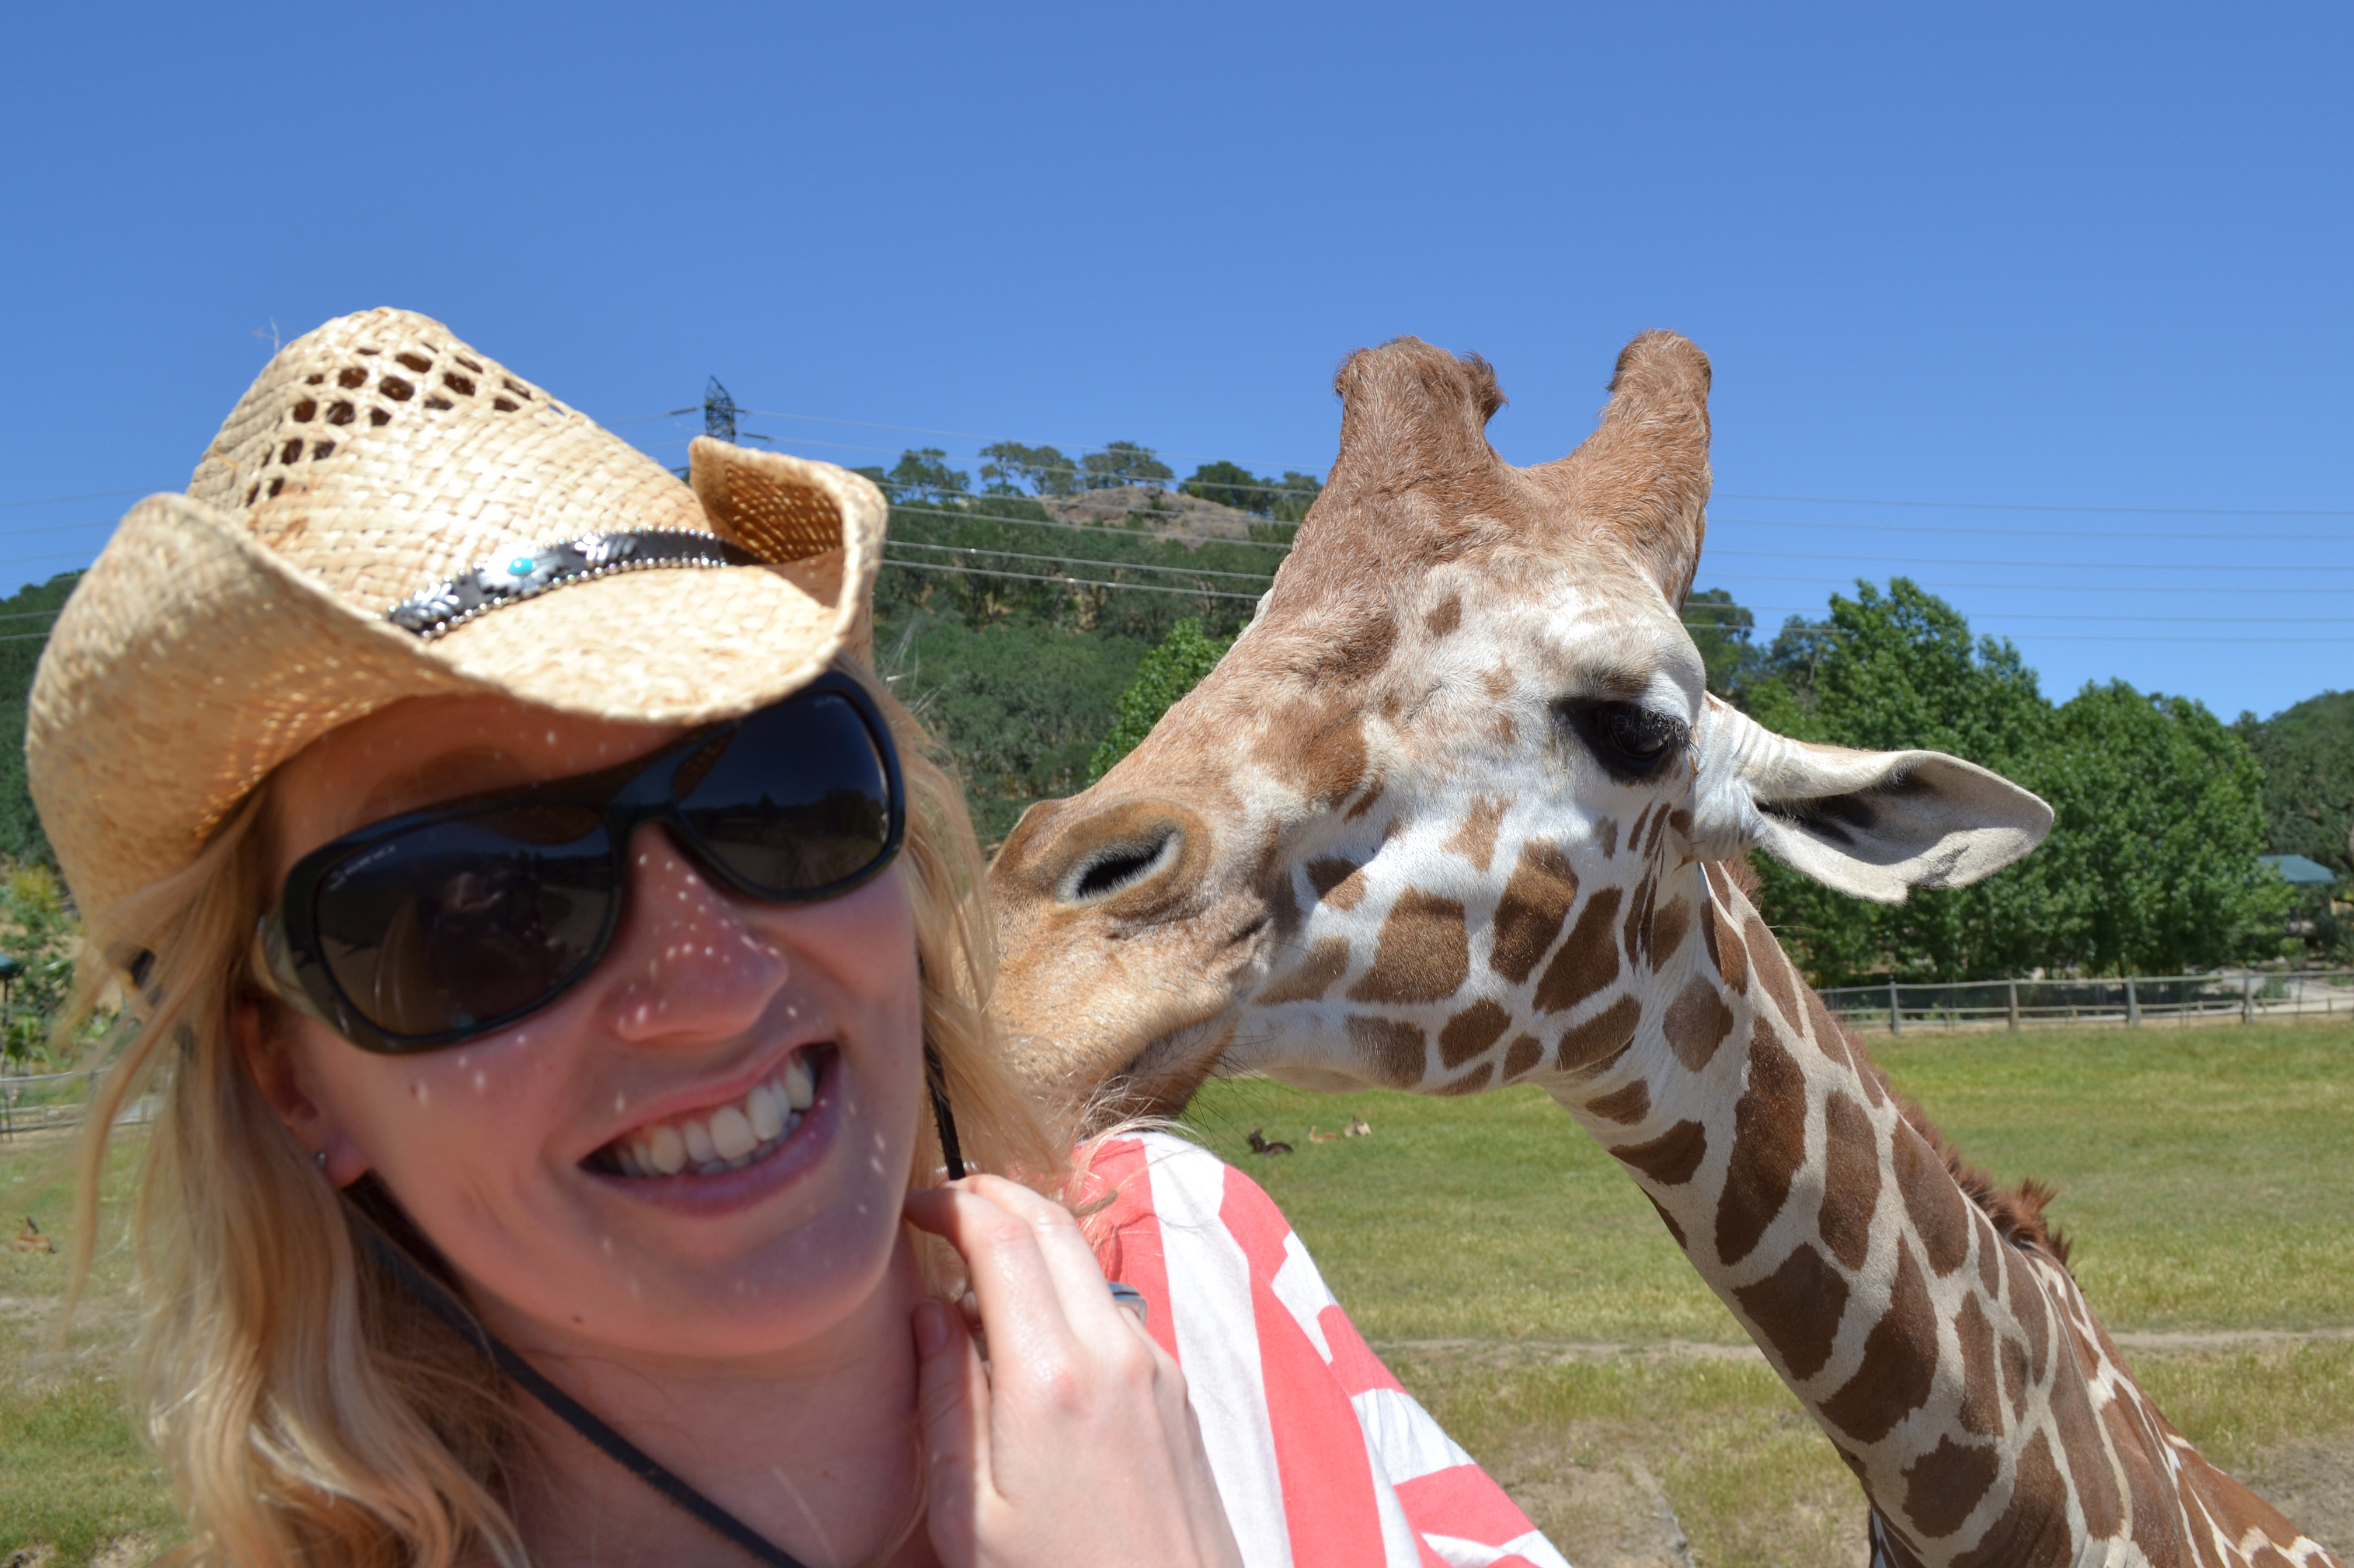 Being investigated by a giraffe at a safari park north of the Napa Valley